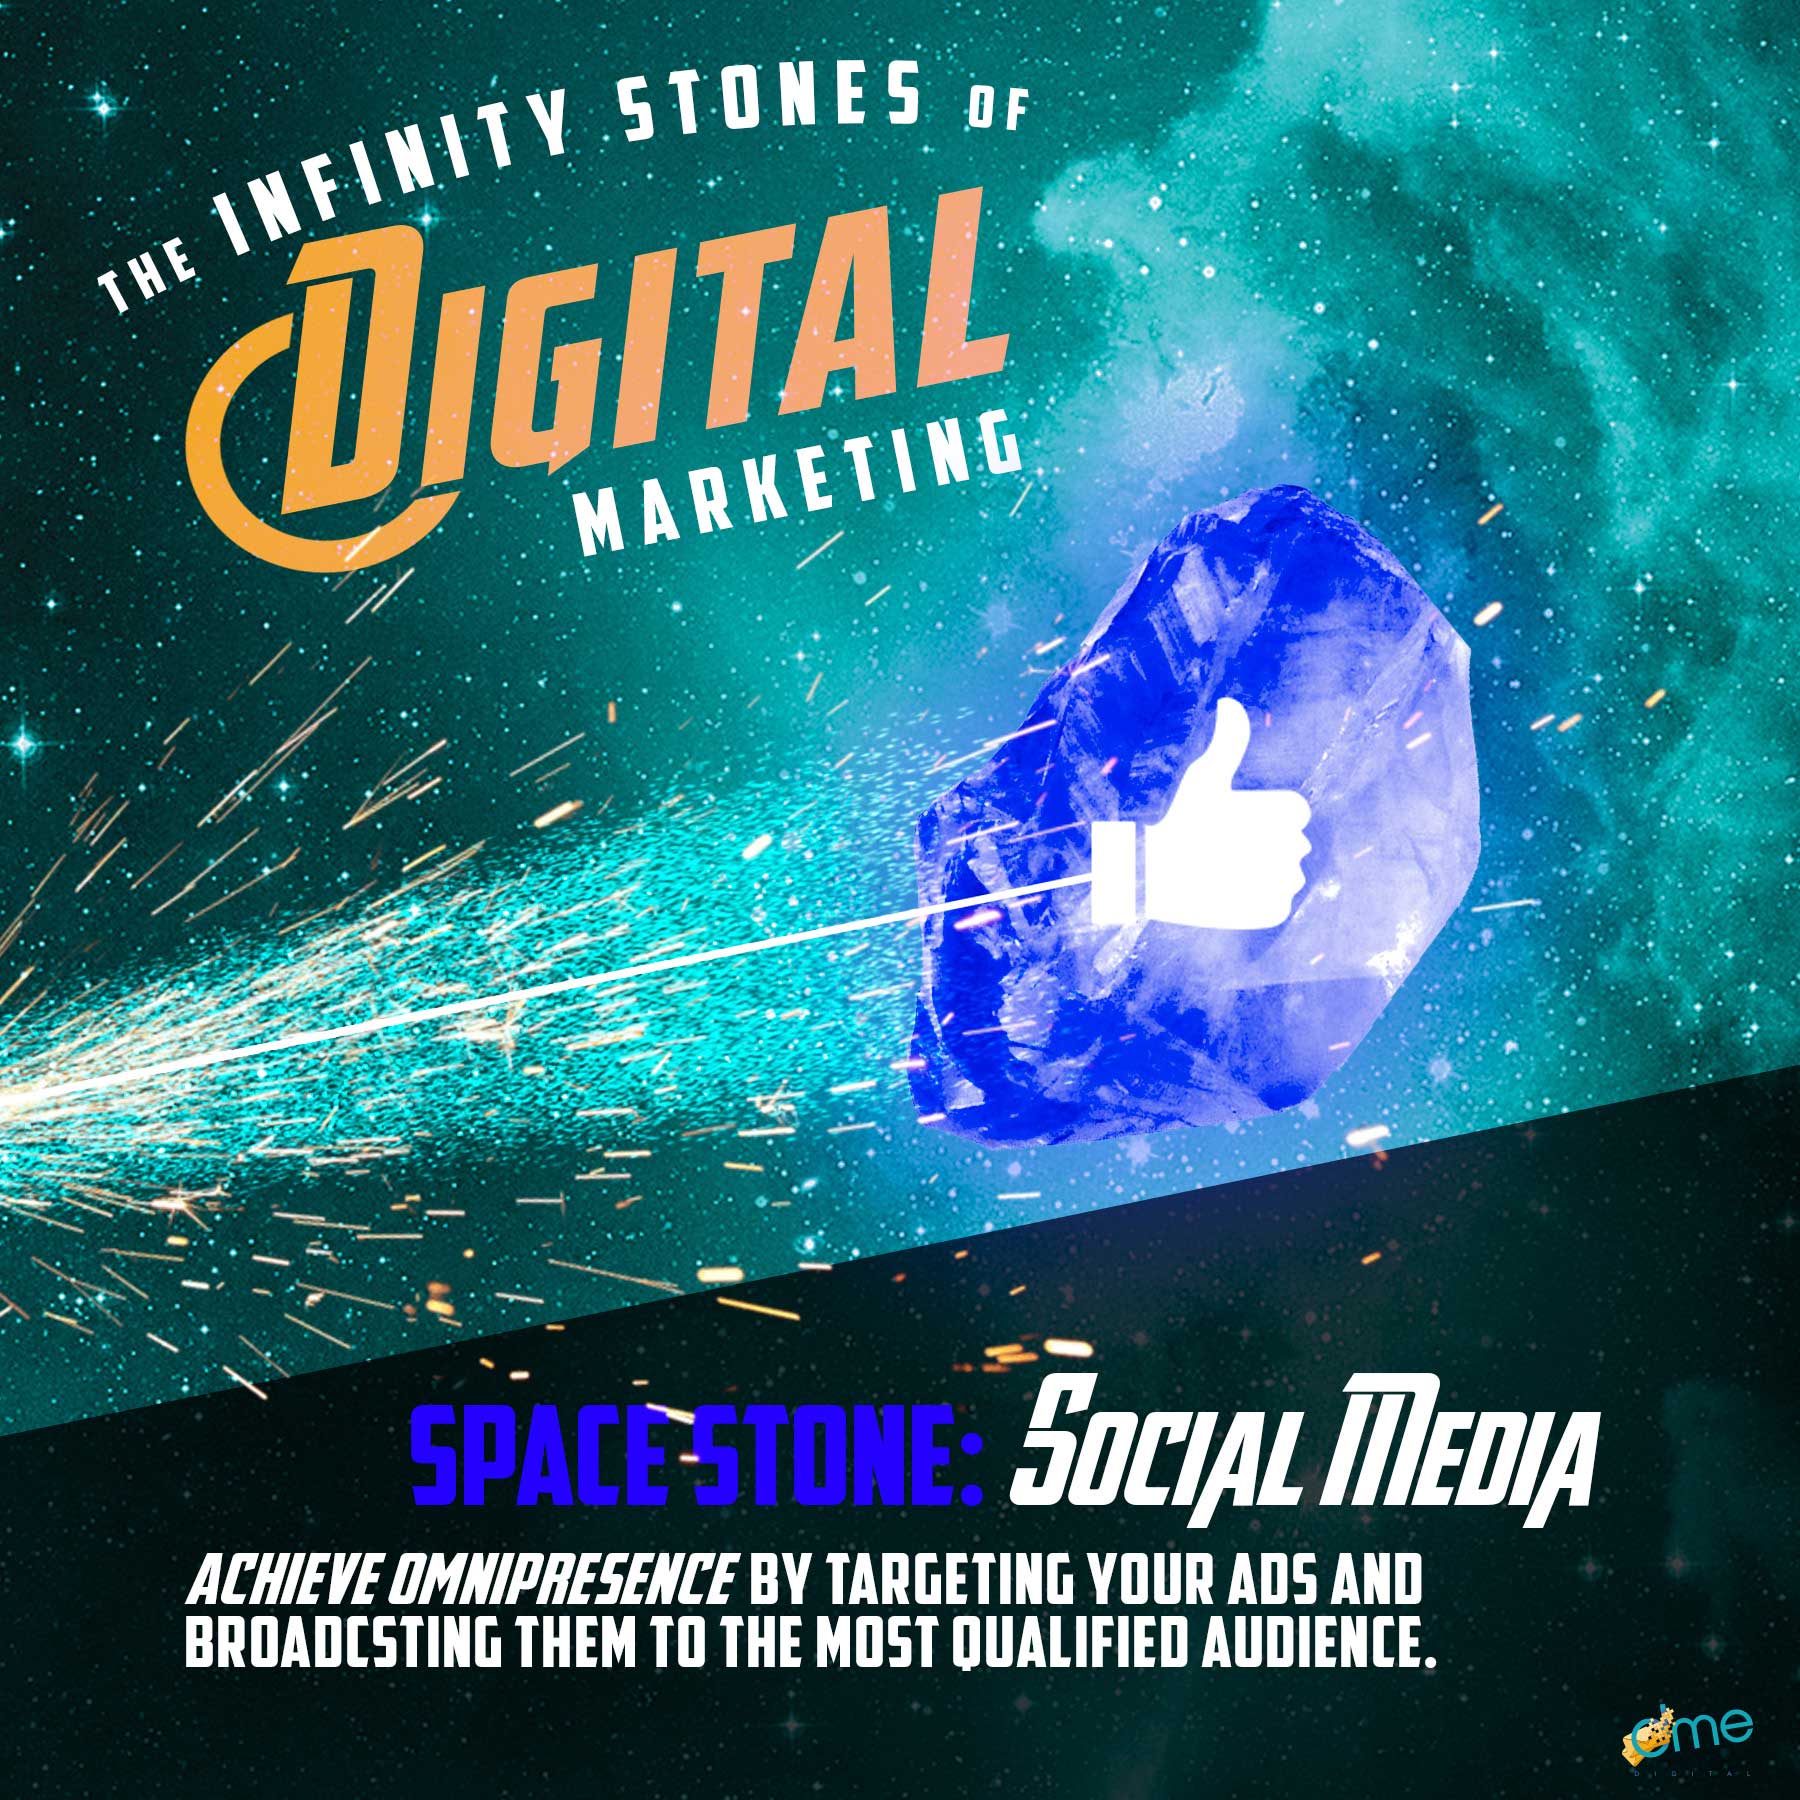 The space stone of digital marketing is social media.